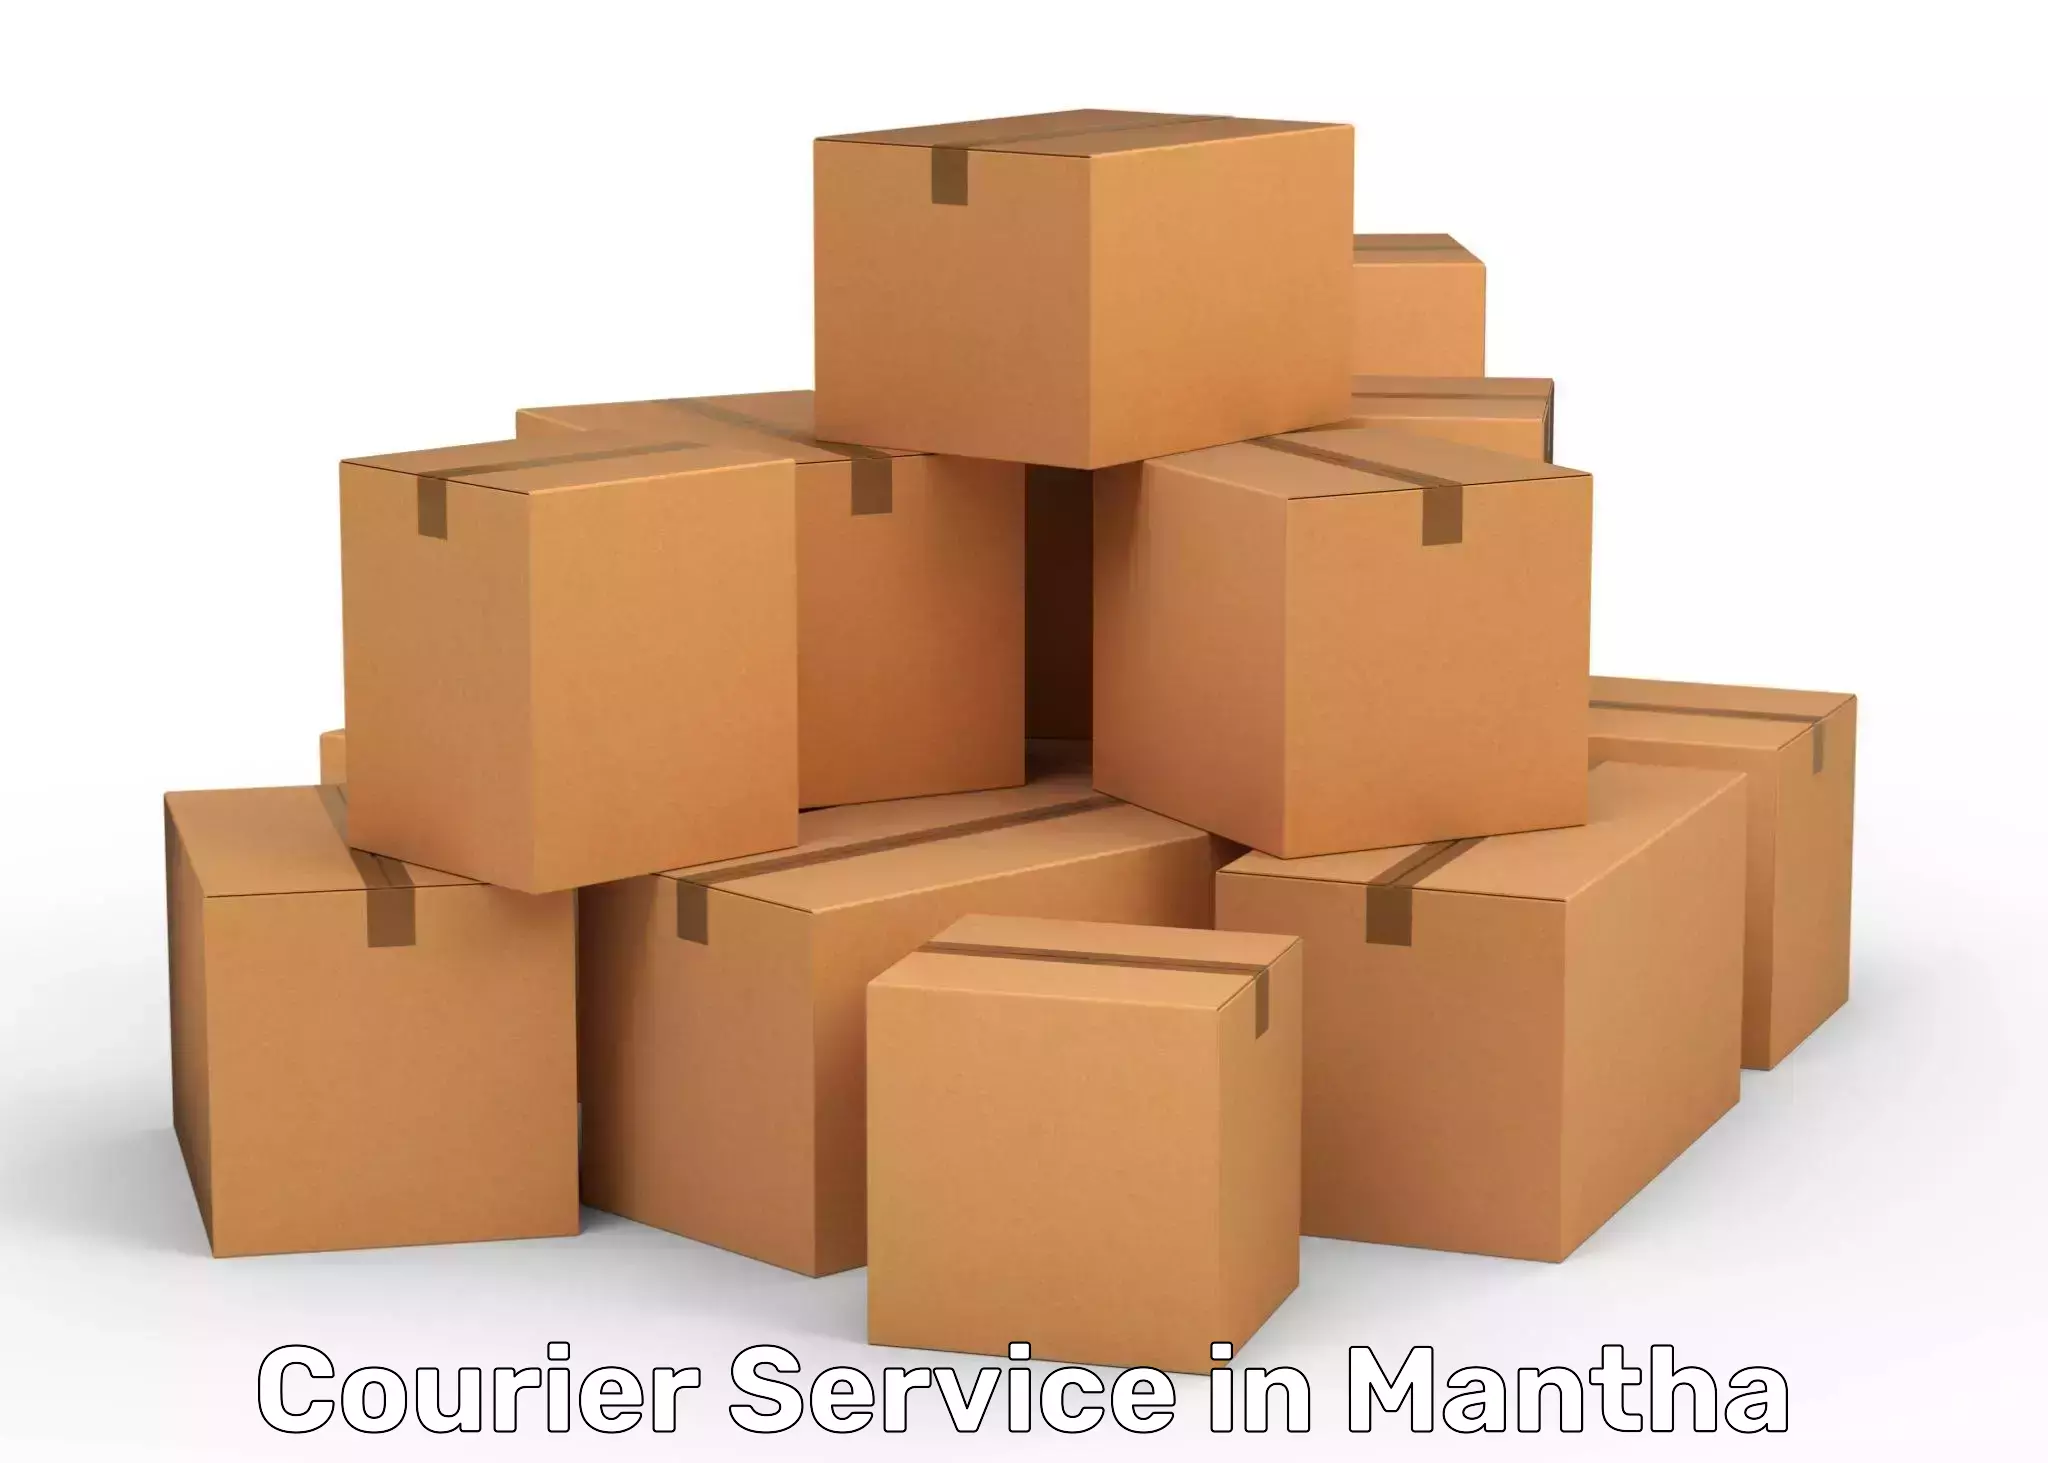 Same-day delivery solutions in Mantha